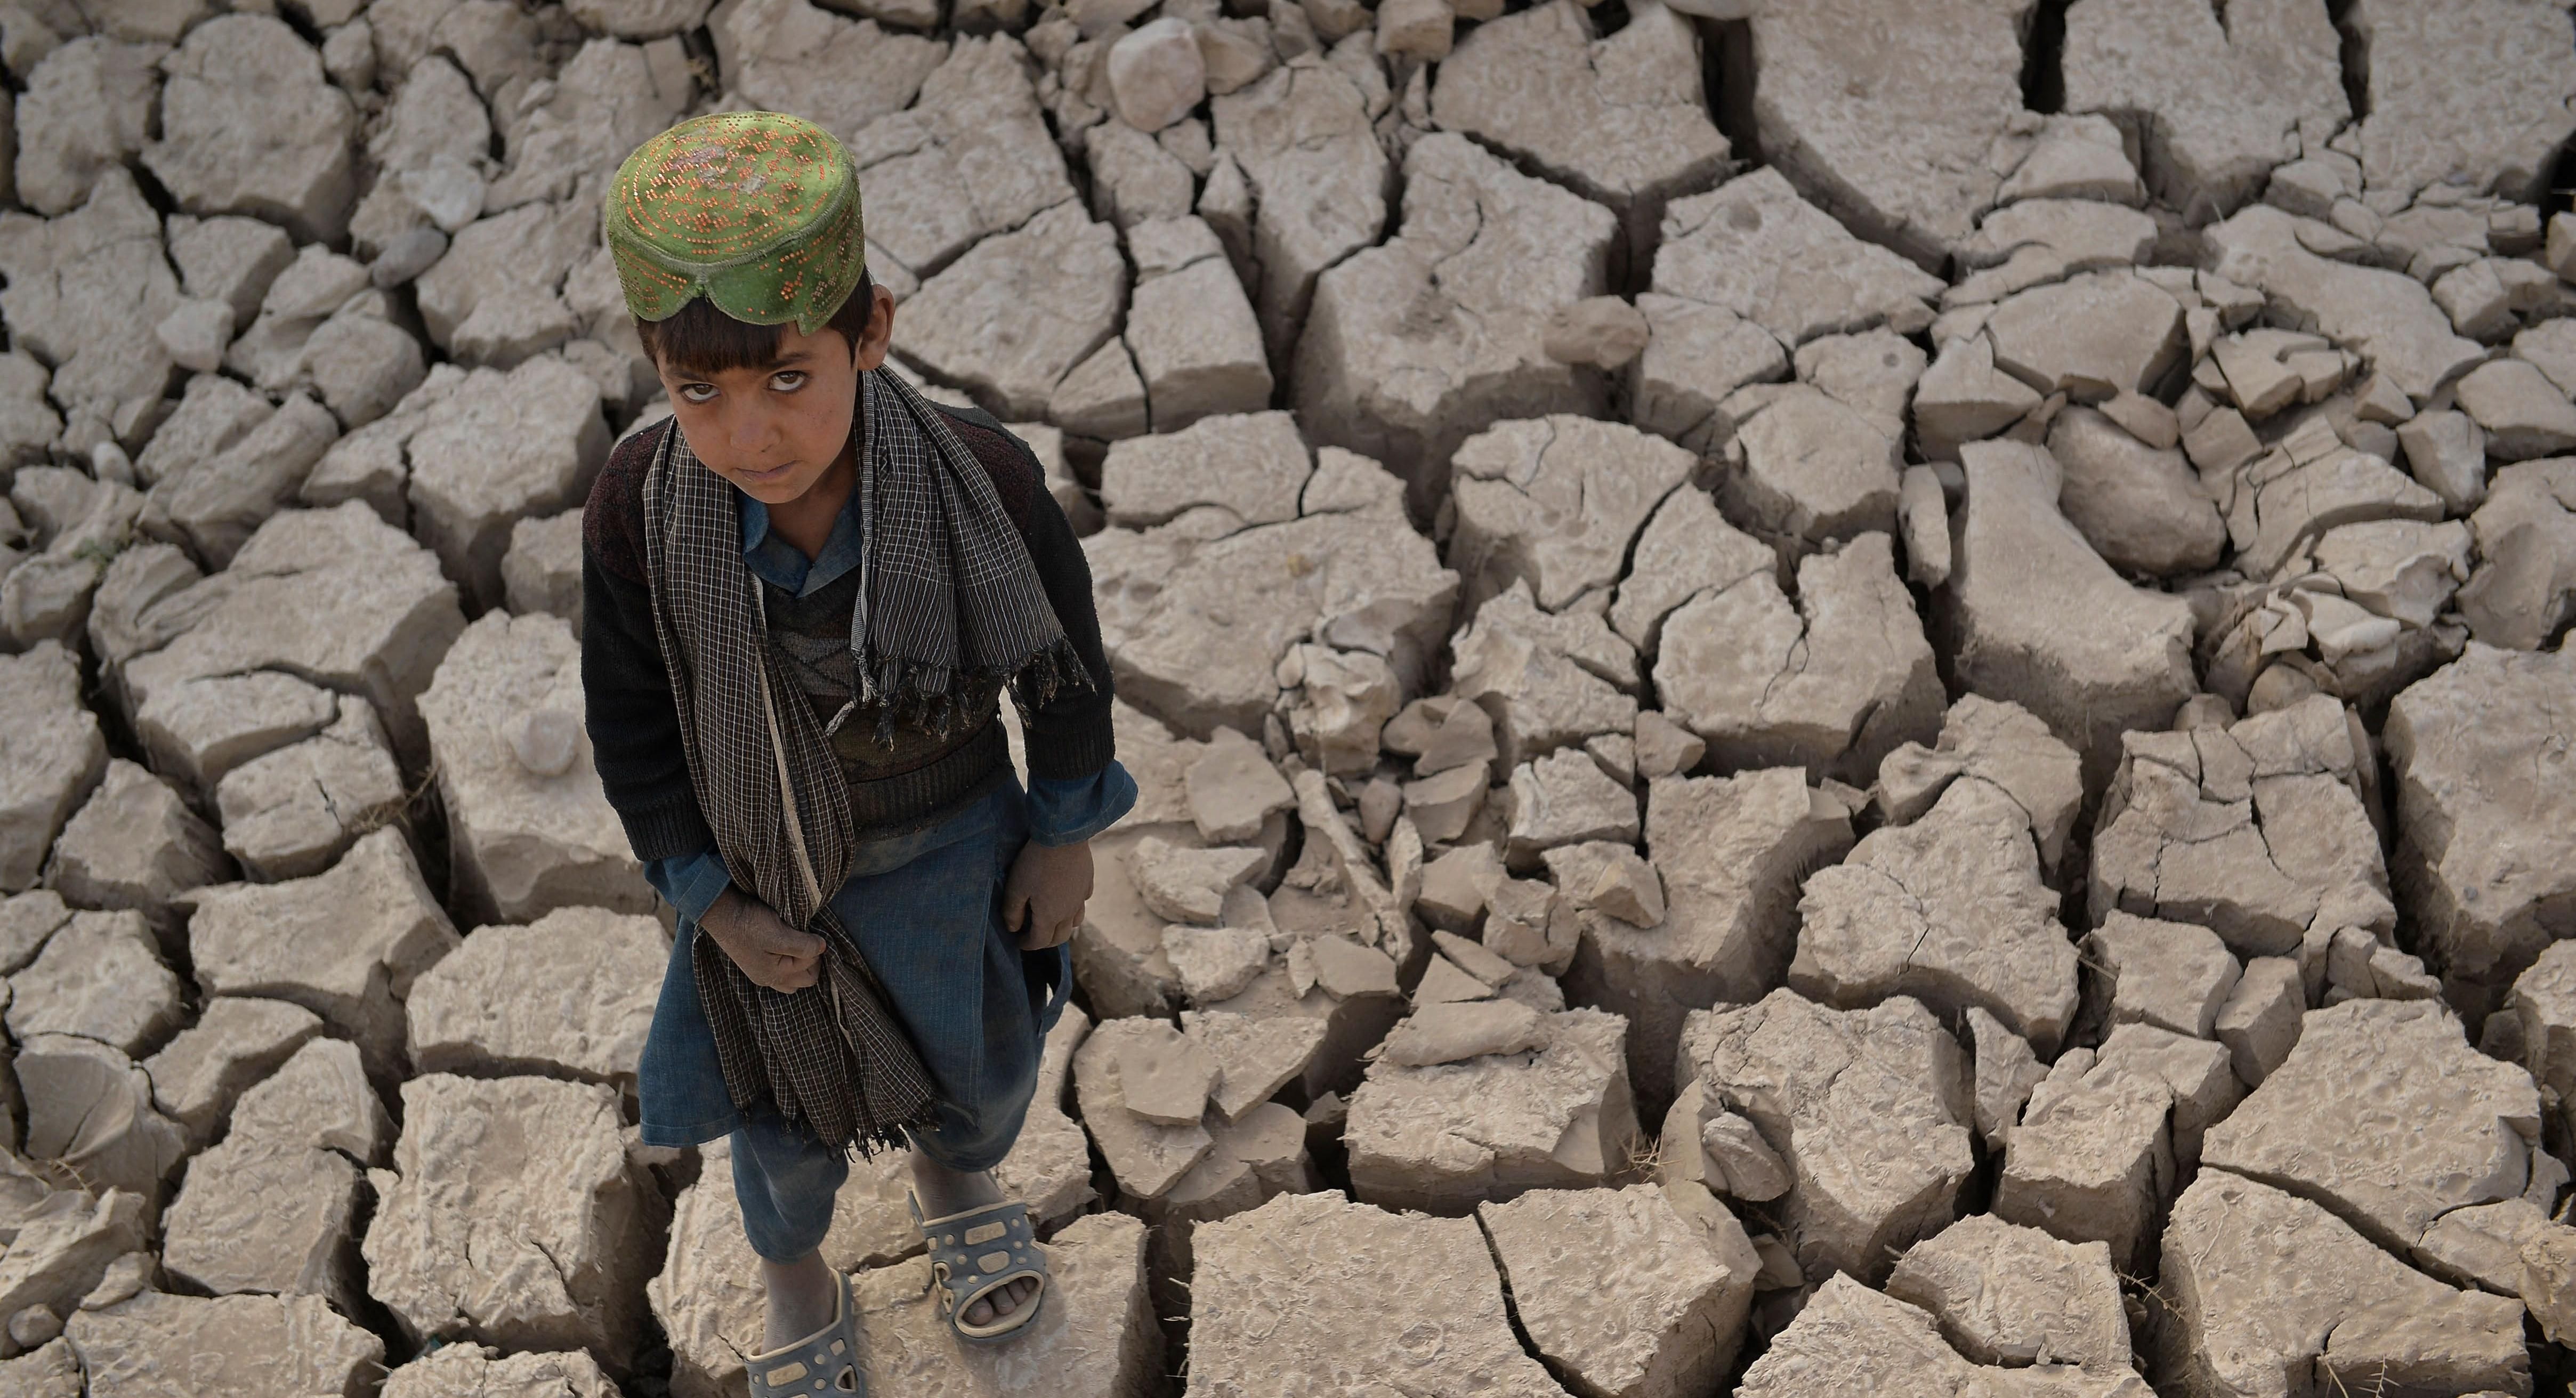 Afghan boy standing in drought-stricken flats